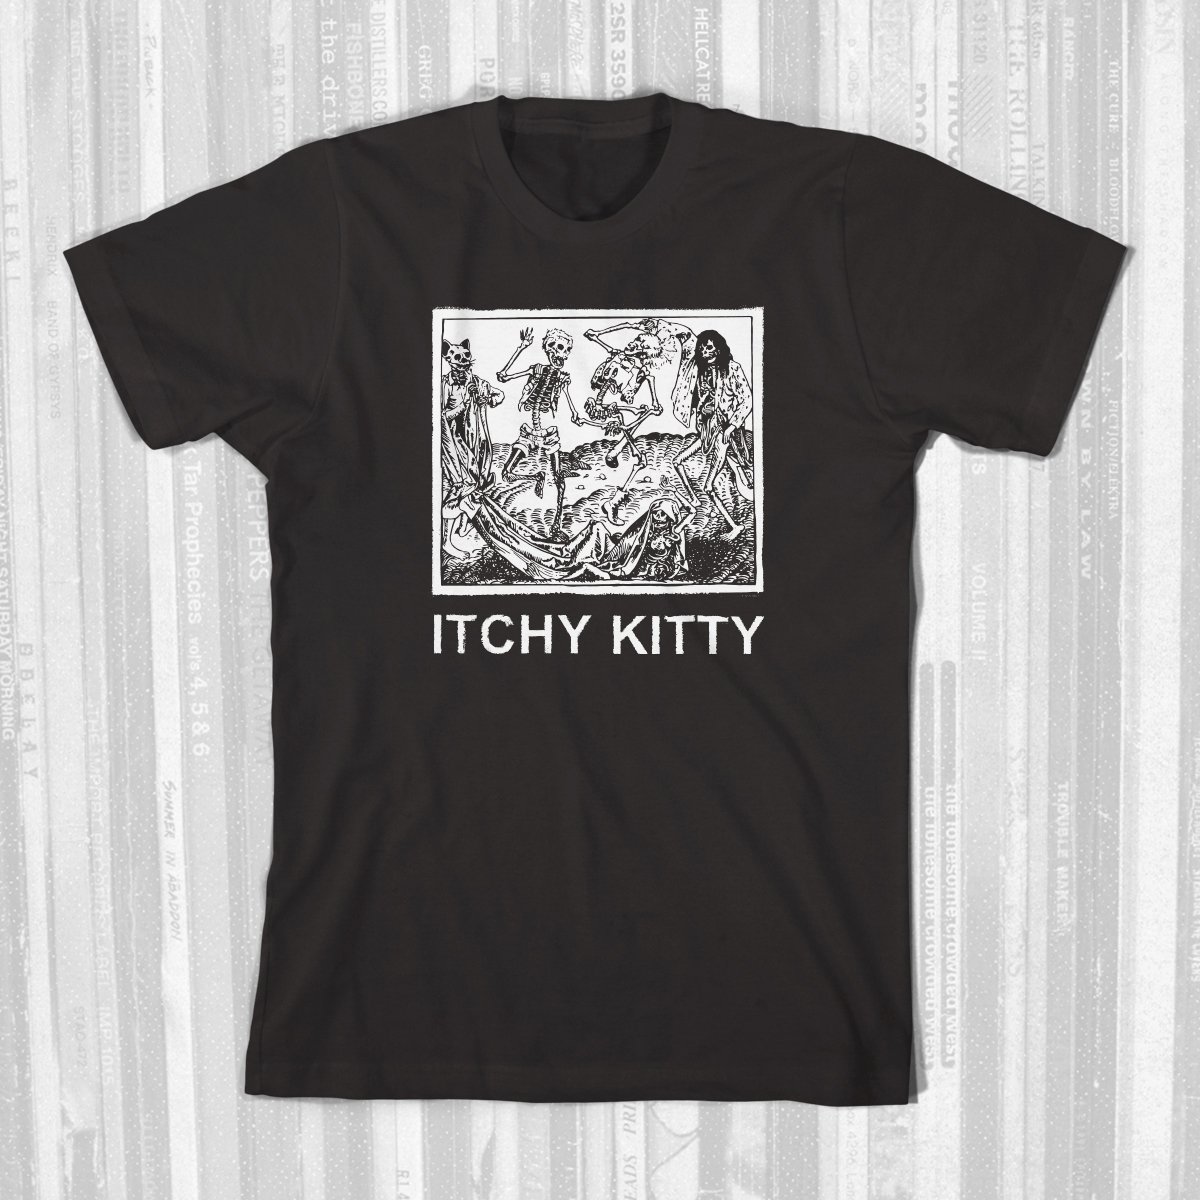 Itchy Kitty - Buckles Tee